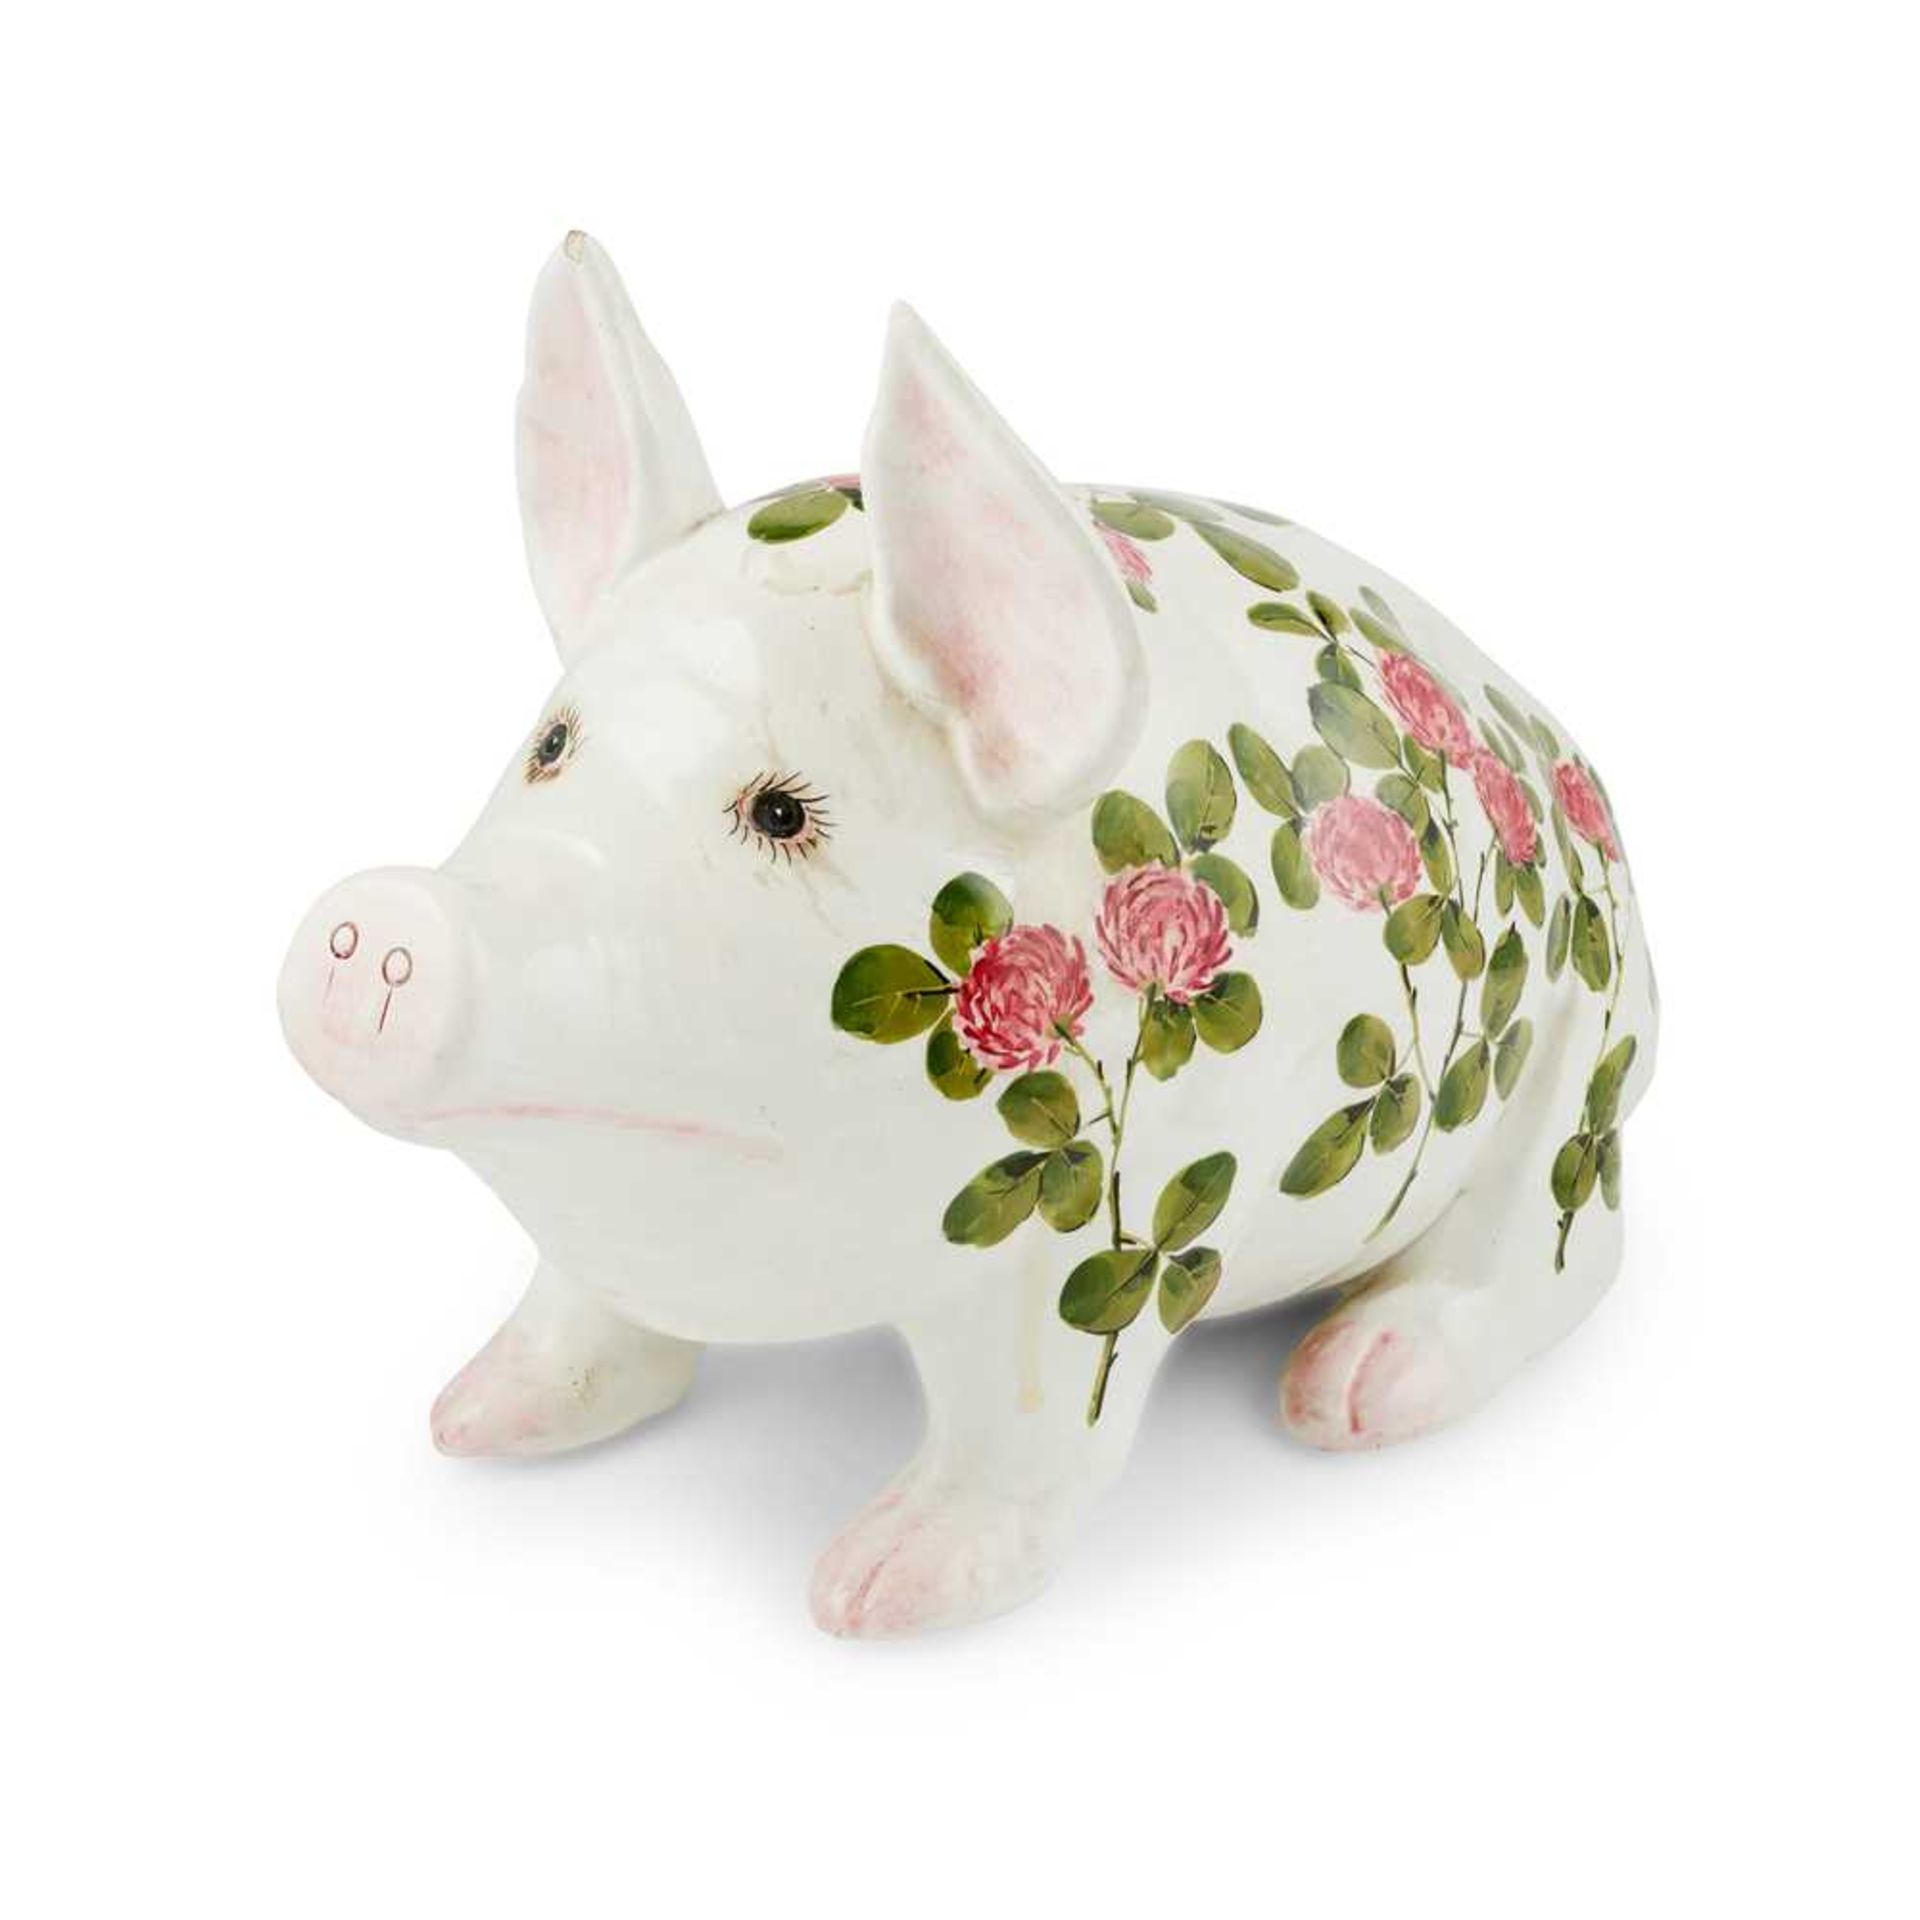 A LARGE WEMYSS WARE PIG 'CLOVER' PATTERN, POST 1930 - Image 4 of 4